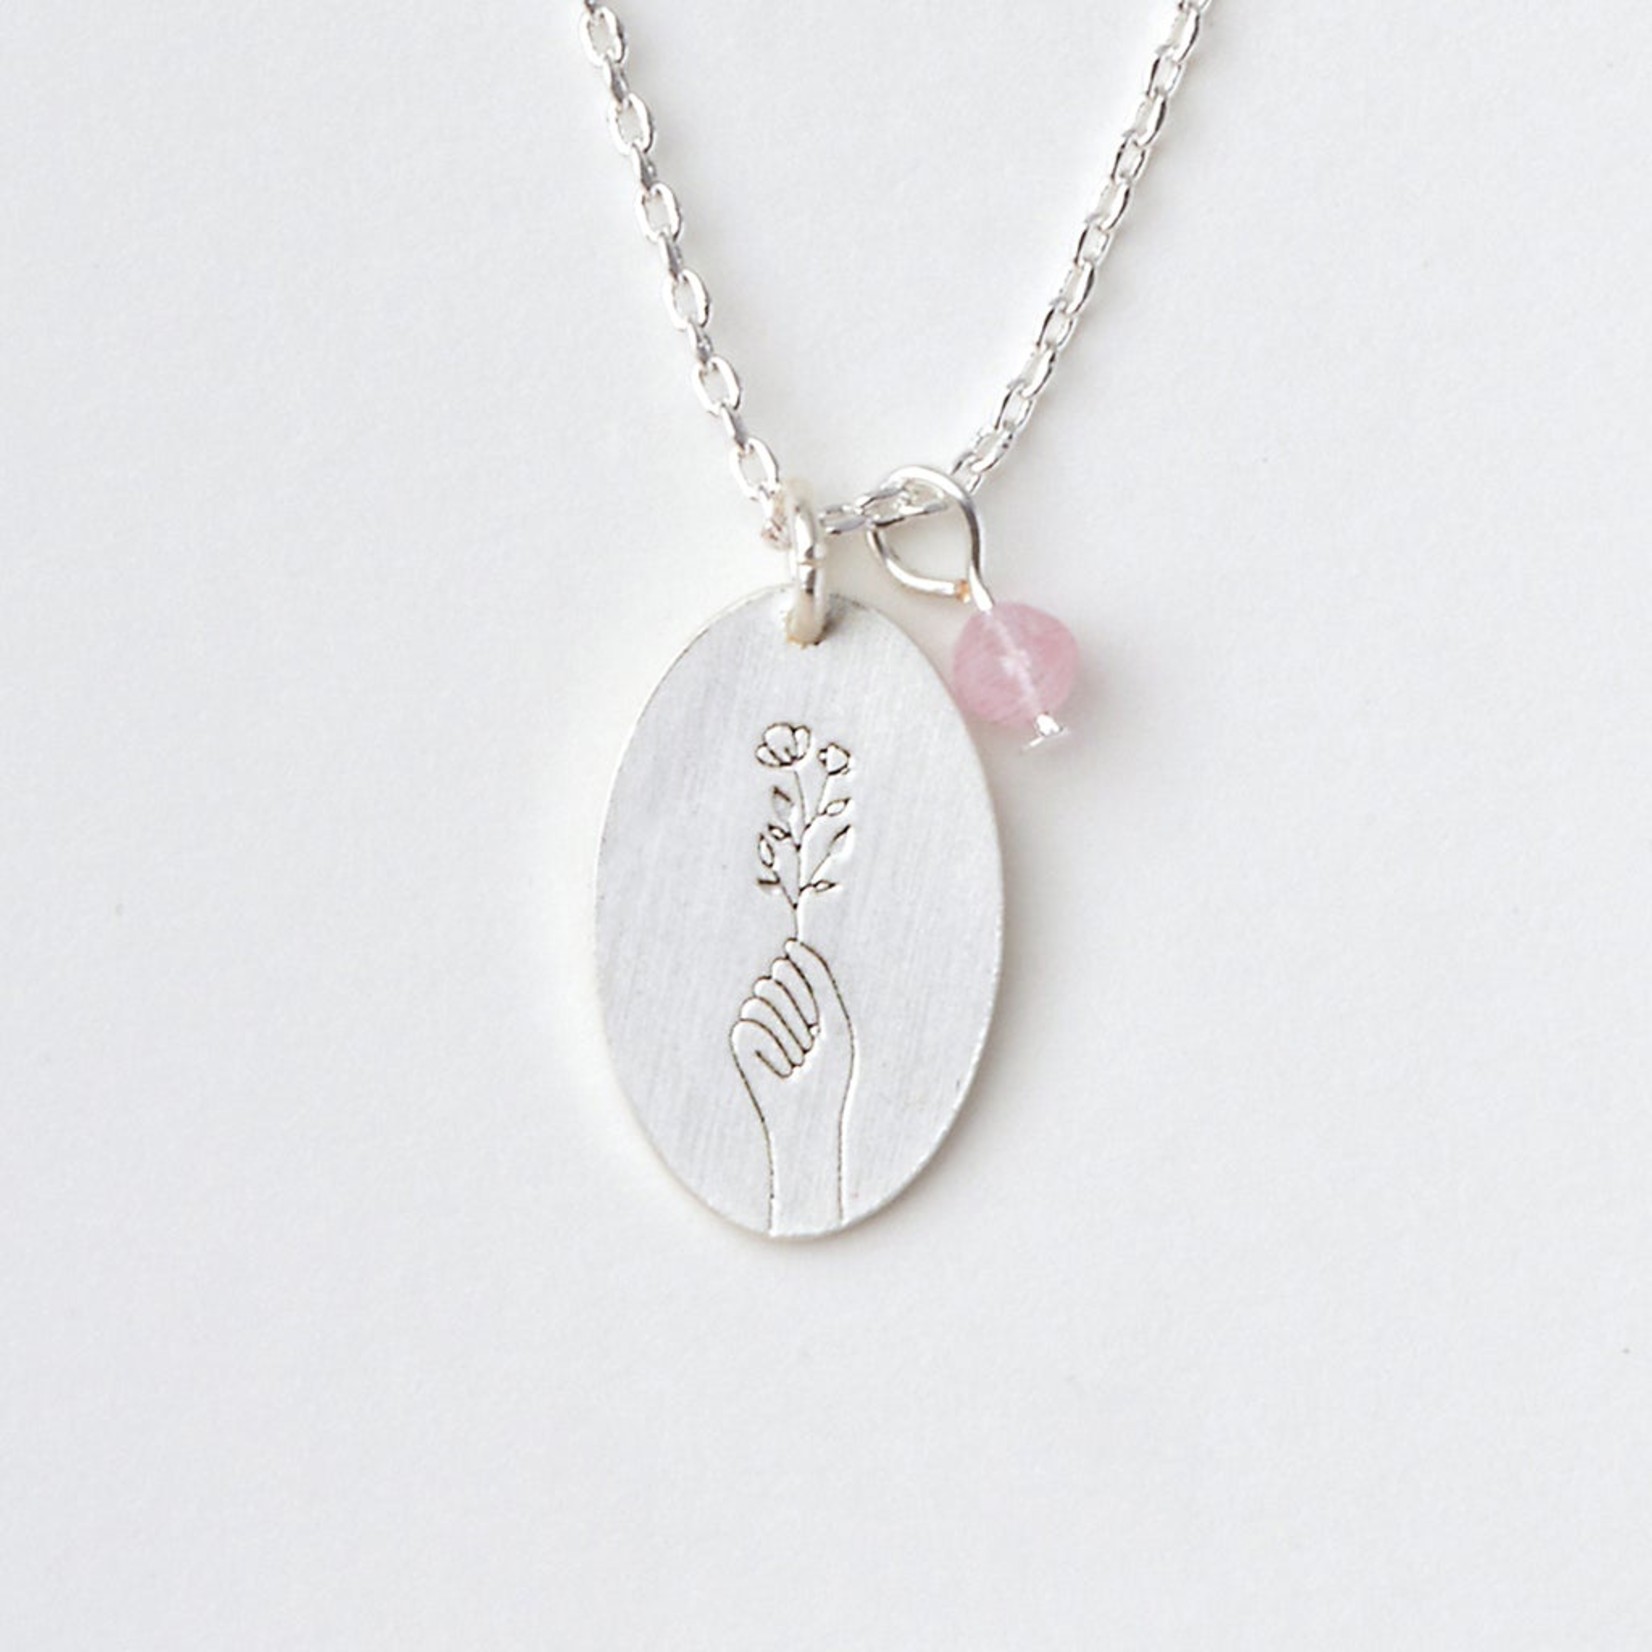 Scout Curated Wears Scout Curated Wears - Charm Necklace Rose Quartz Silver